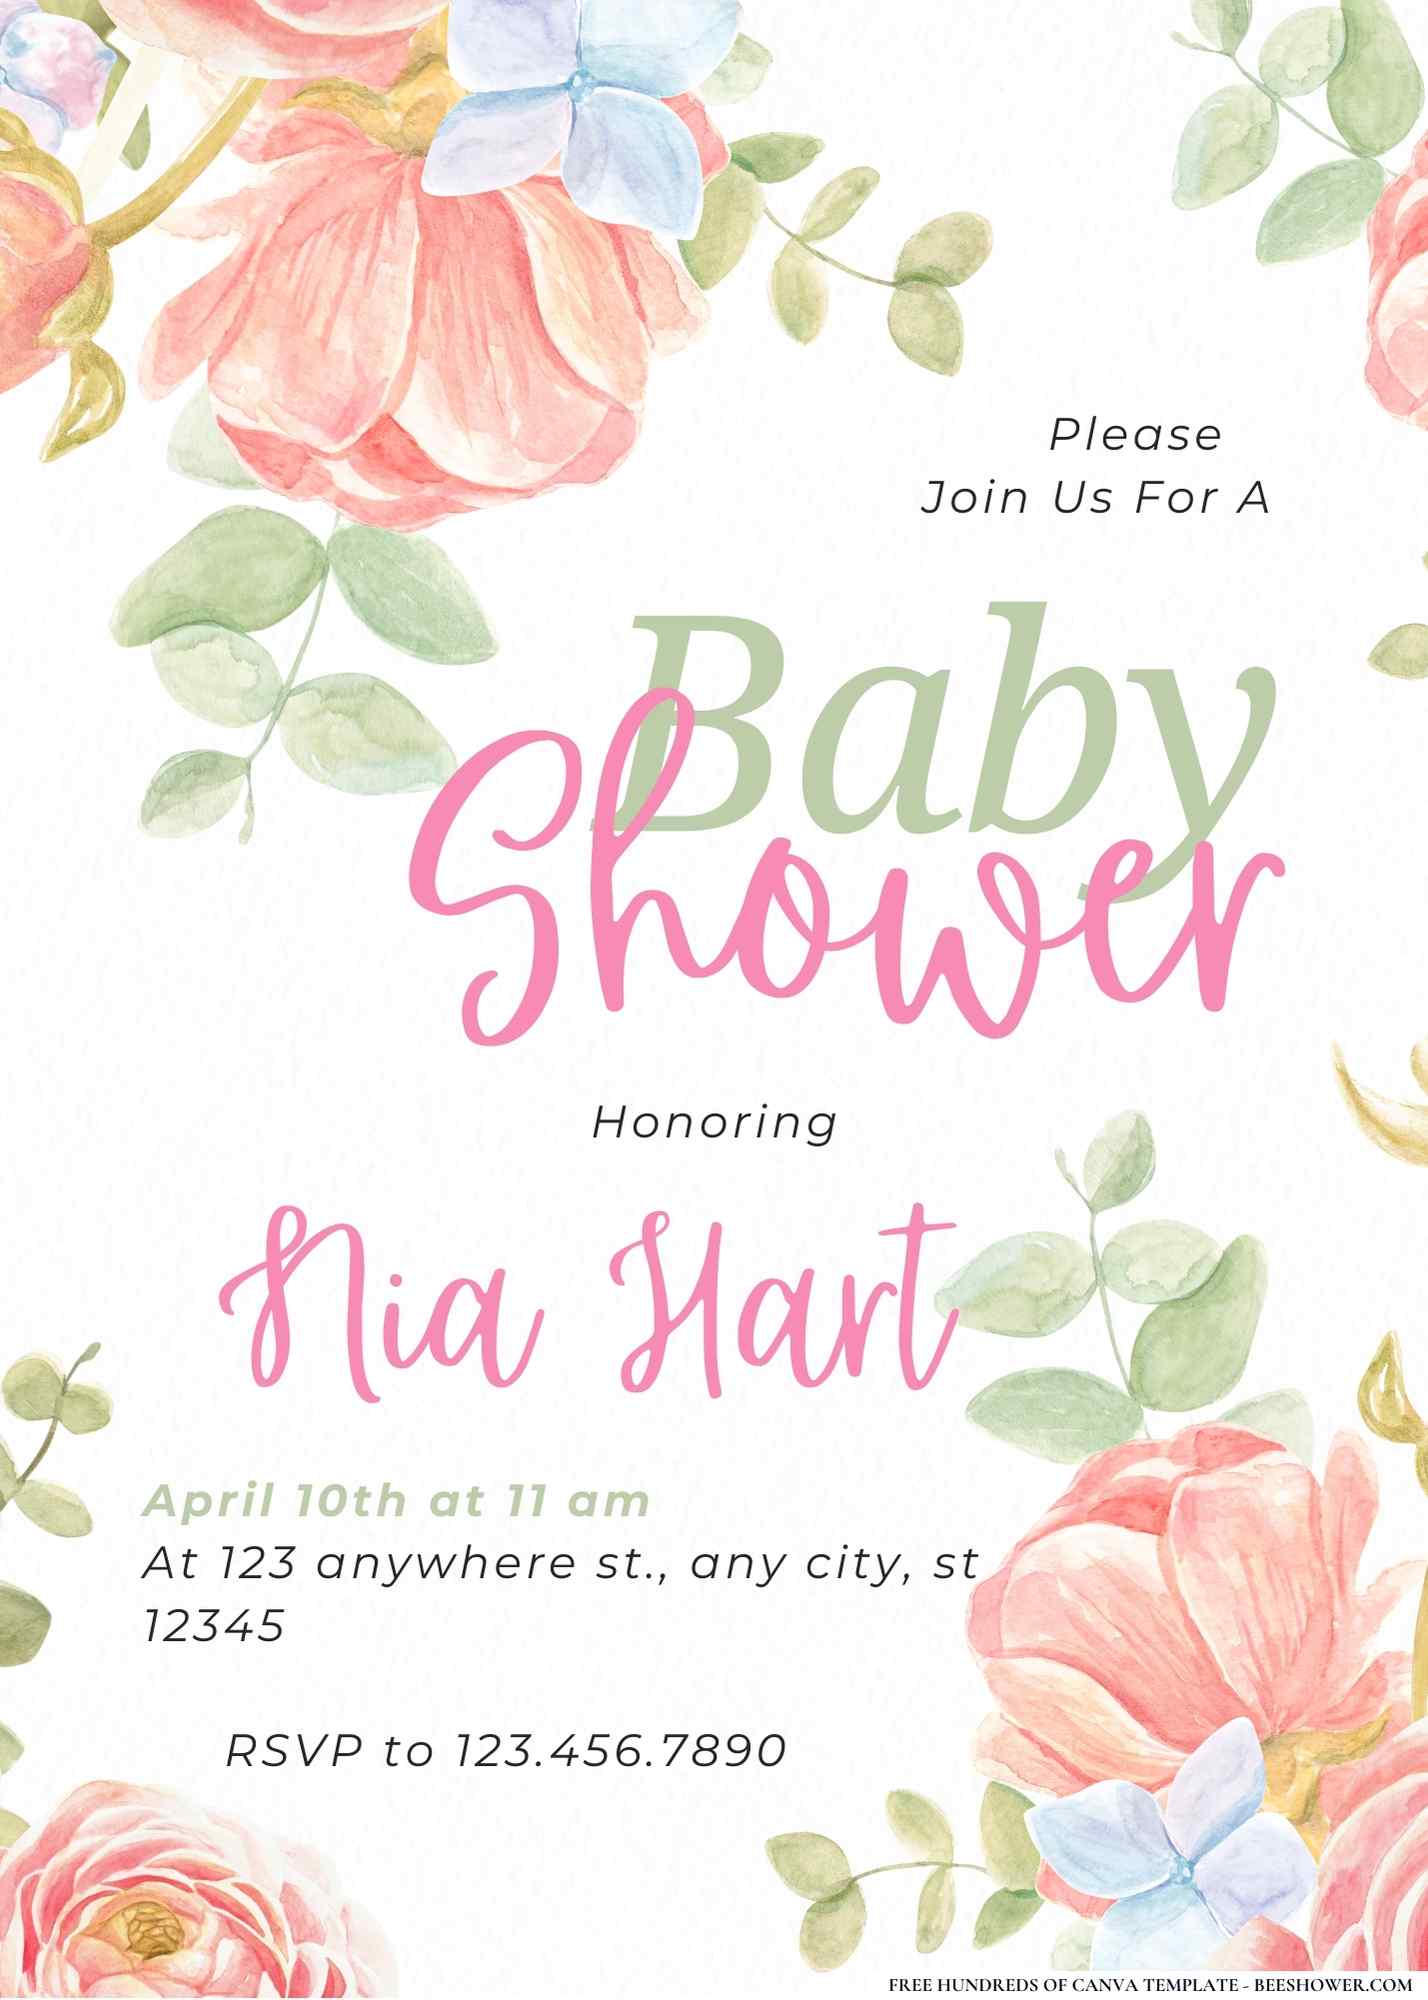 Peachy Keen Blossoms Baby Shower Invitation